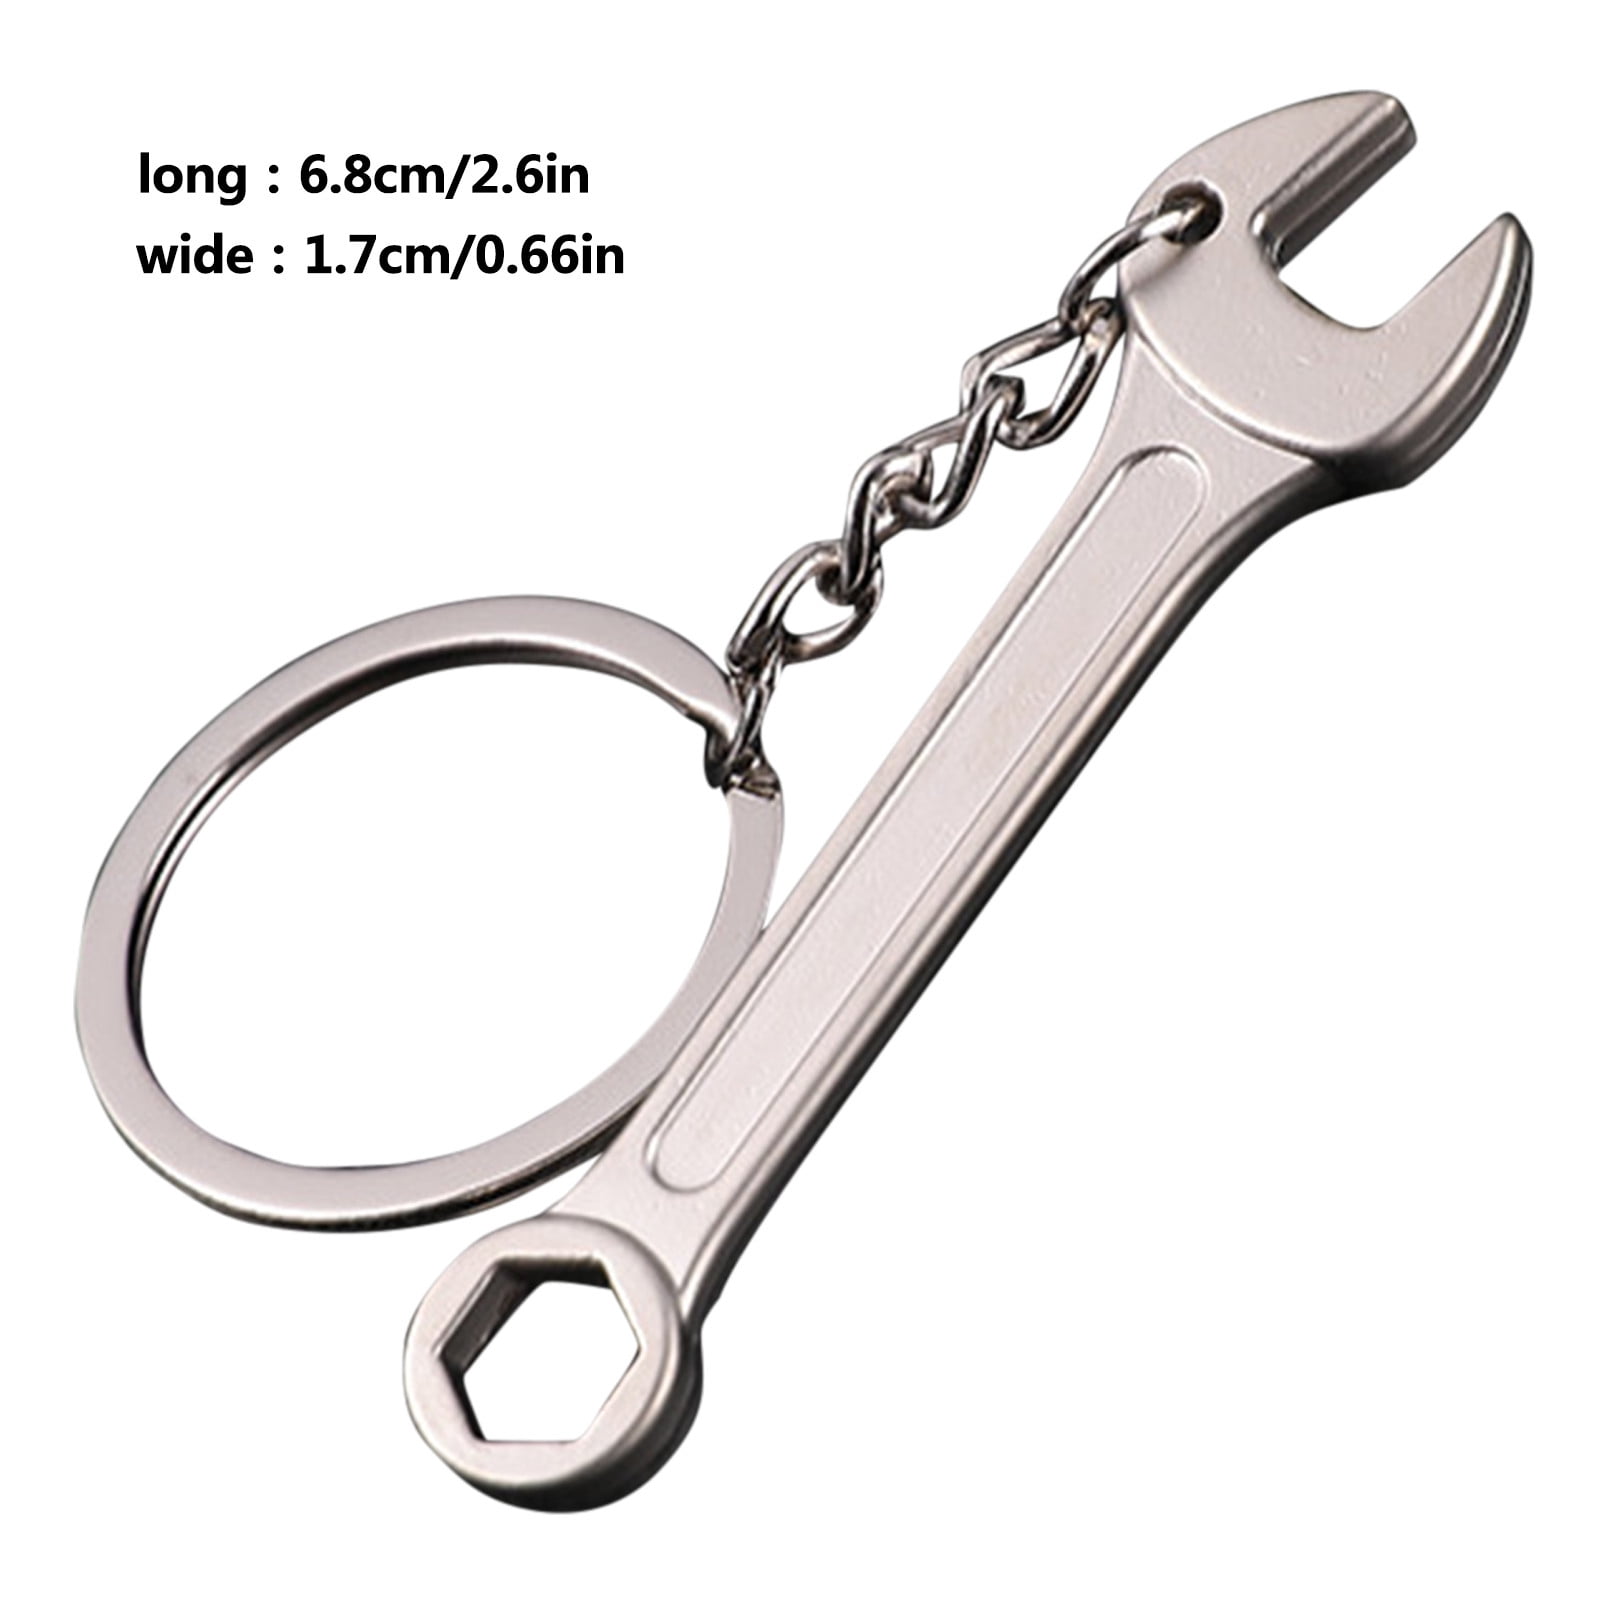 New Metal Adjustable Creative Tool Wrench Spanner Key Chain Ring Keyring Gift 